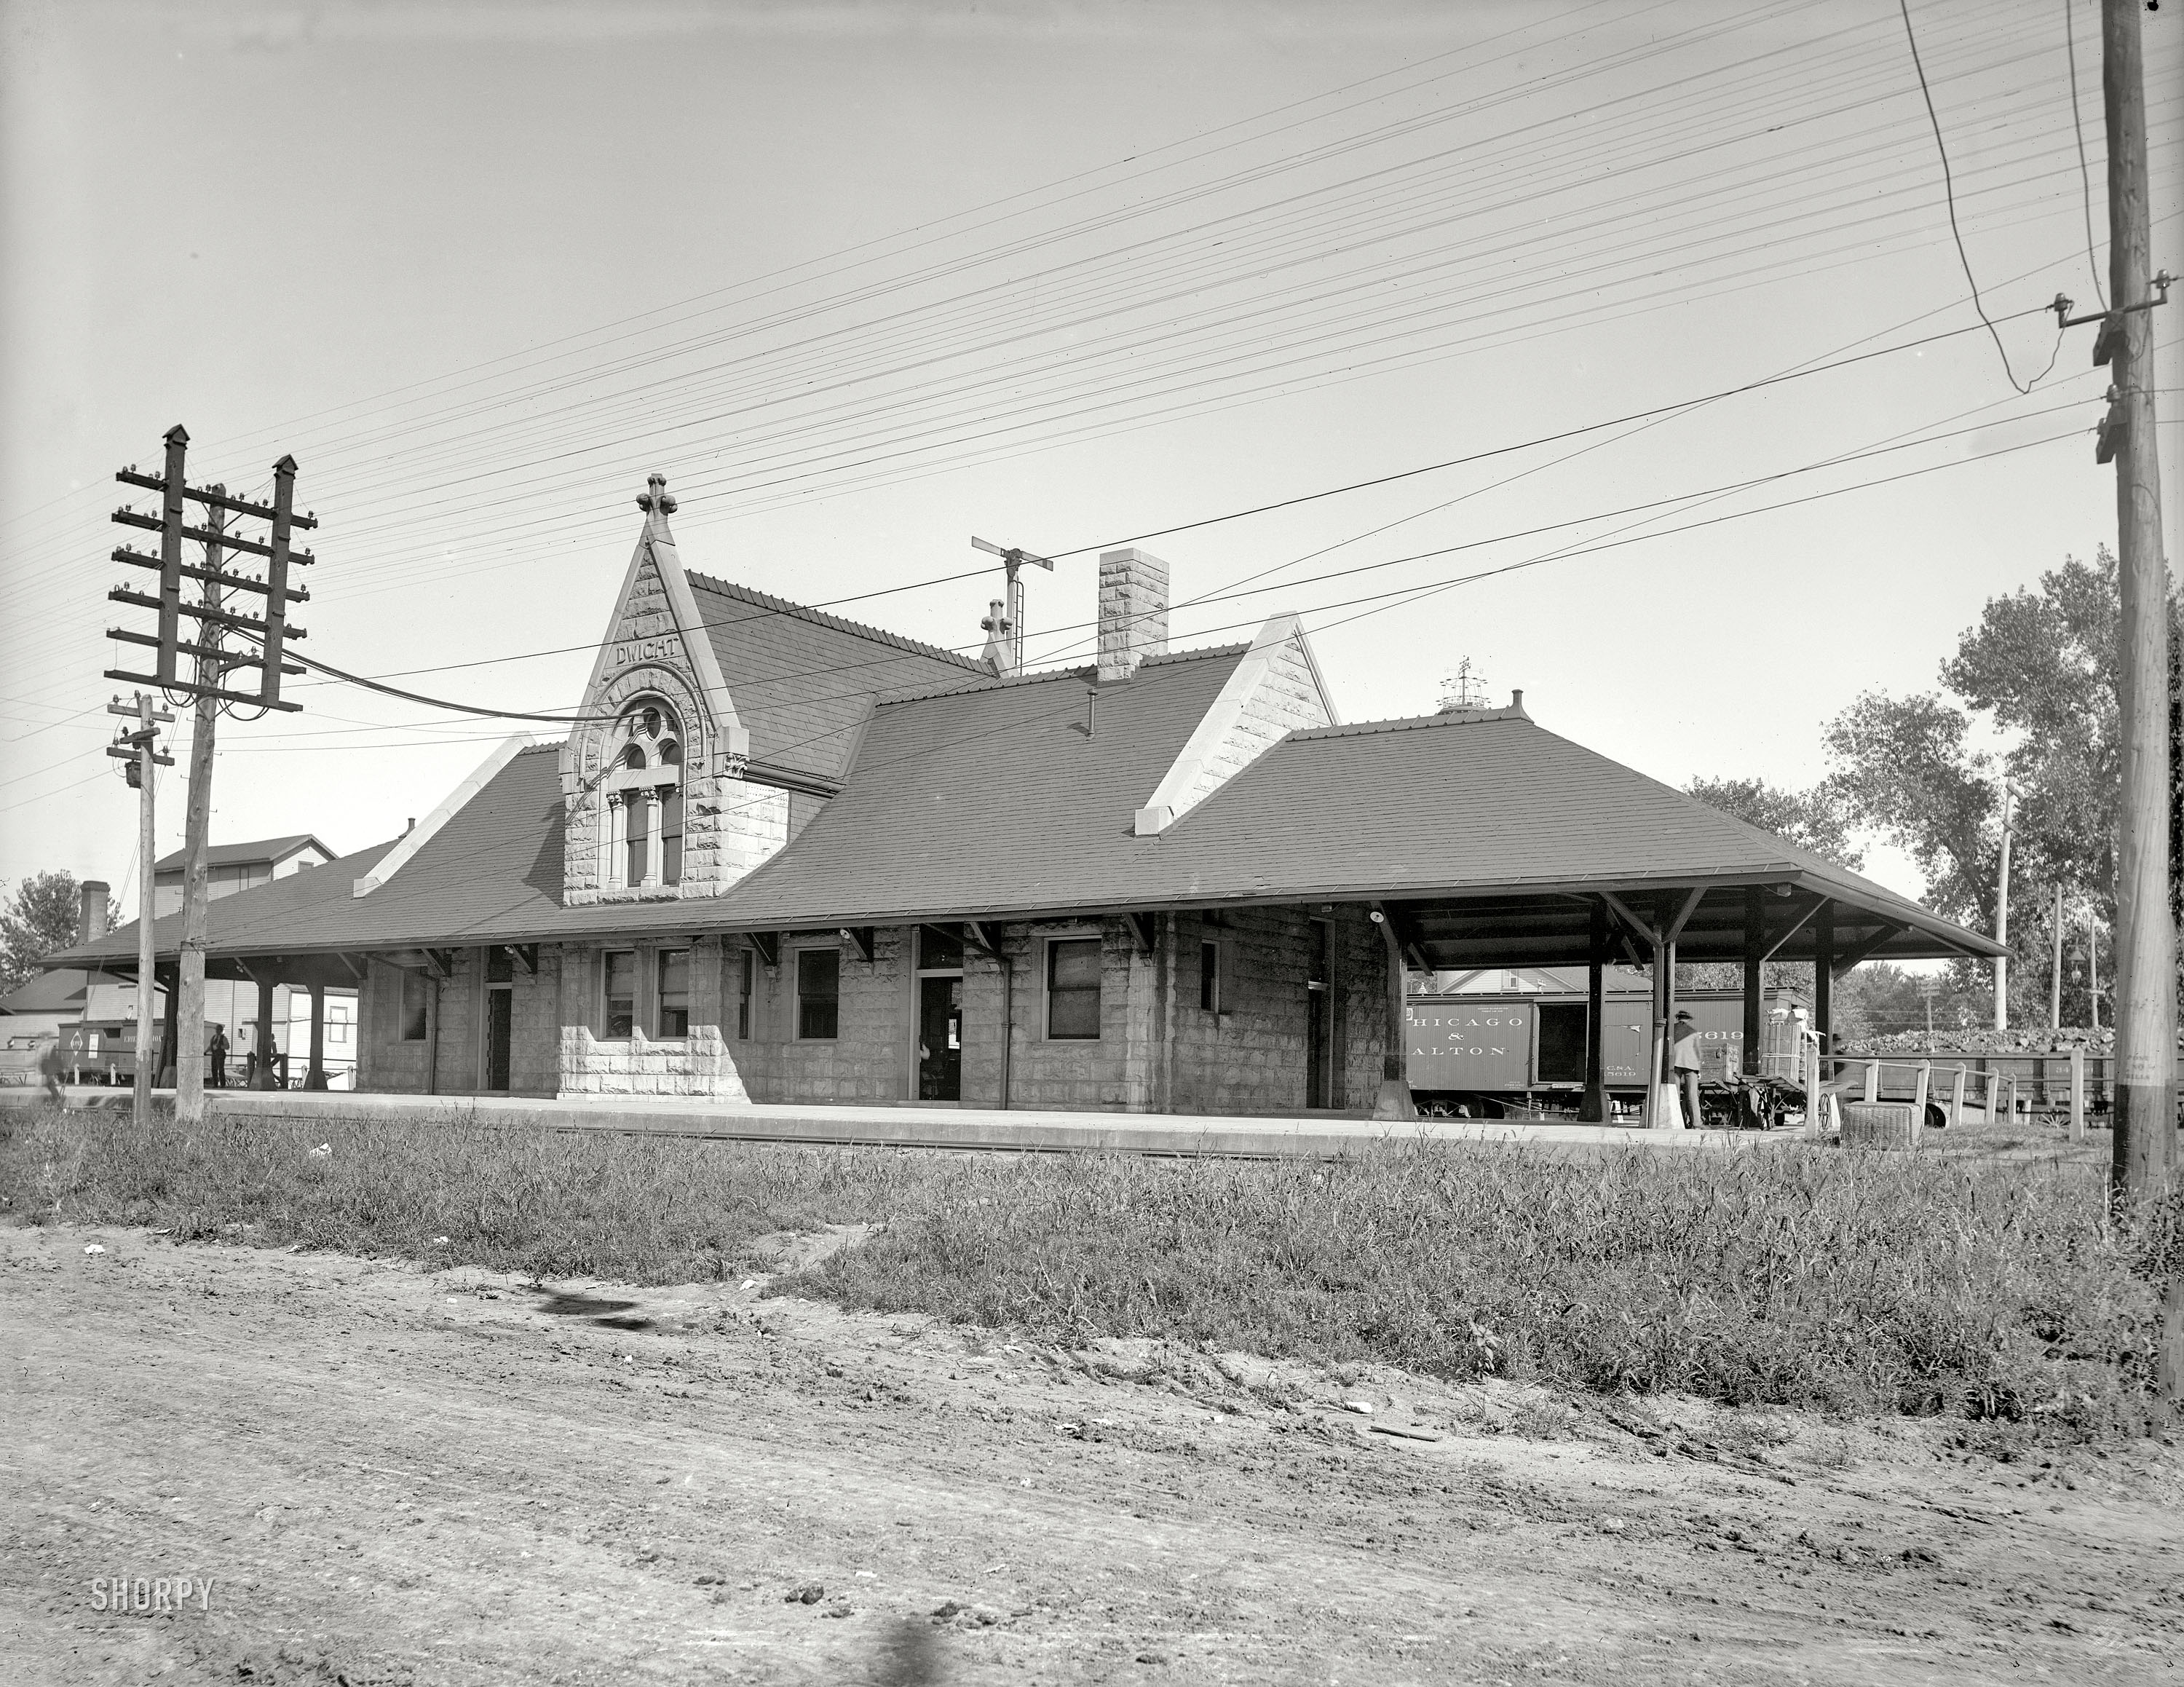 Circa 1900. "Chicago & Alton station at at Dwight, Illinois." Home to a very healthy looking telegraph pole. Detroit Publishing glass negative. View full size.